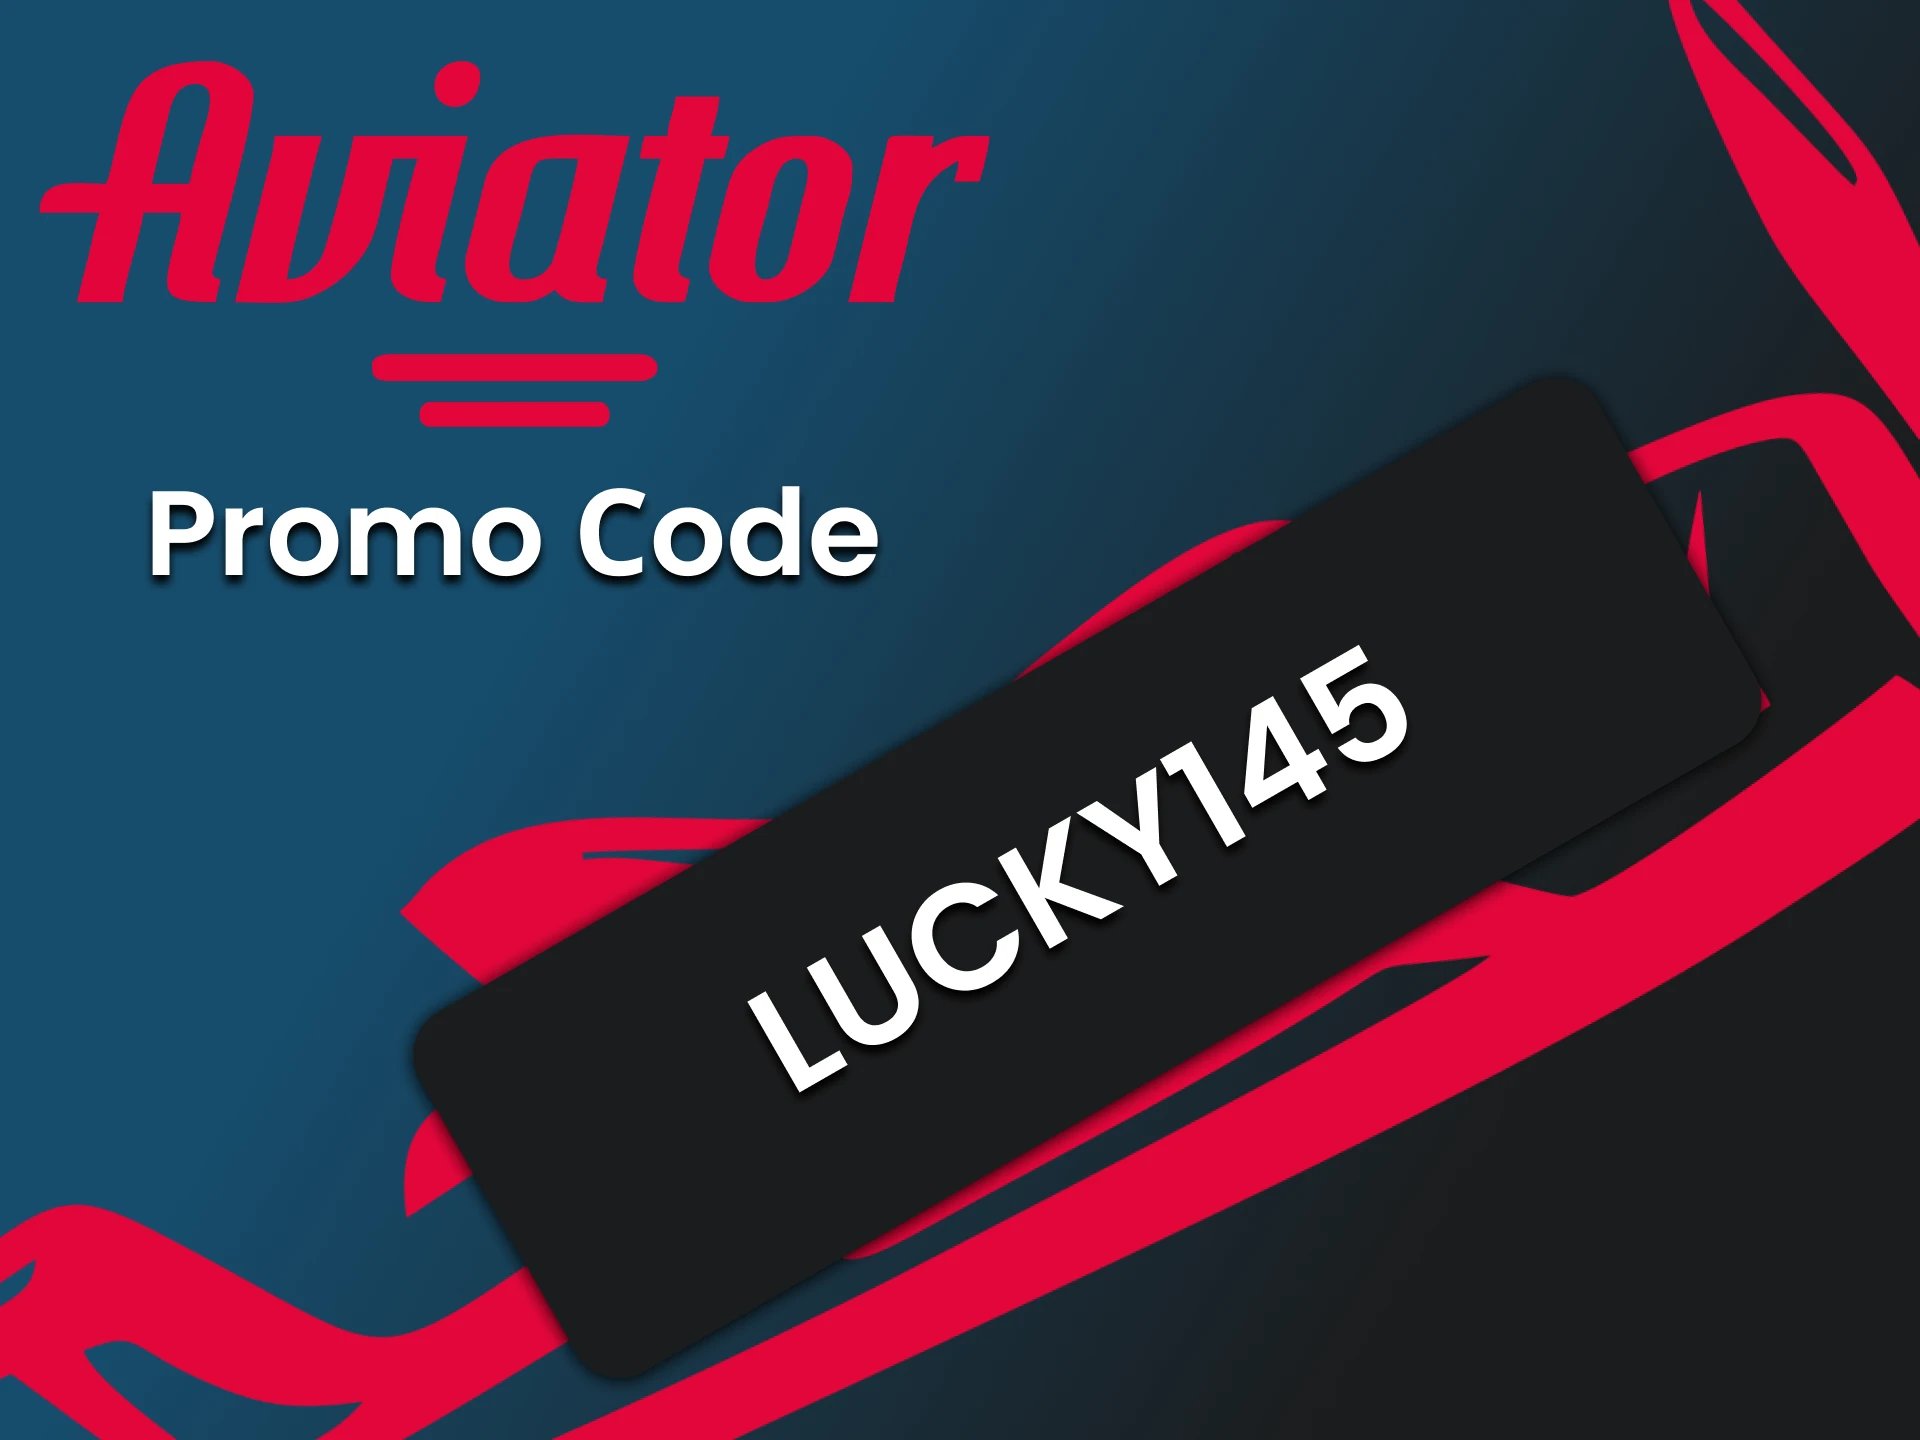 To receive the bonus, use the promotional code for the game Aviator.